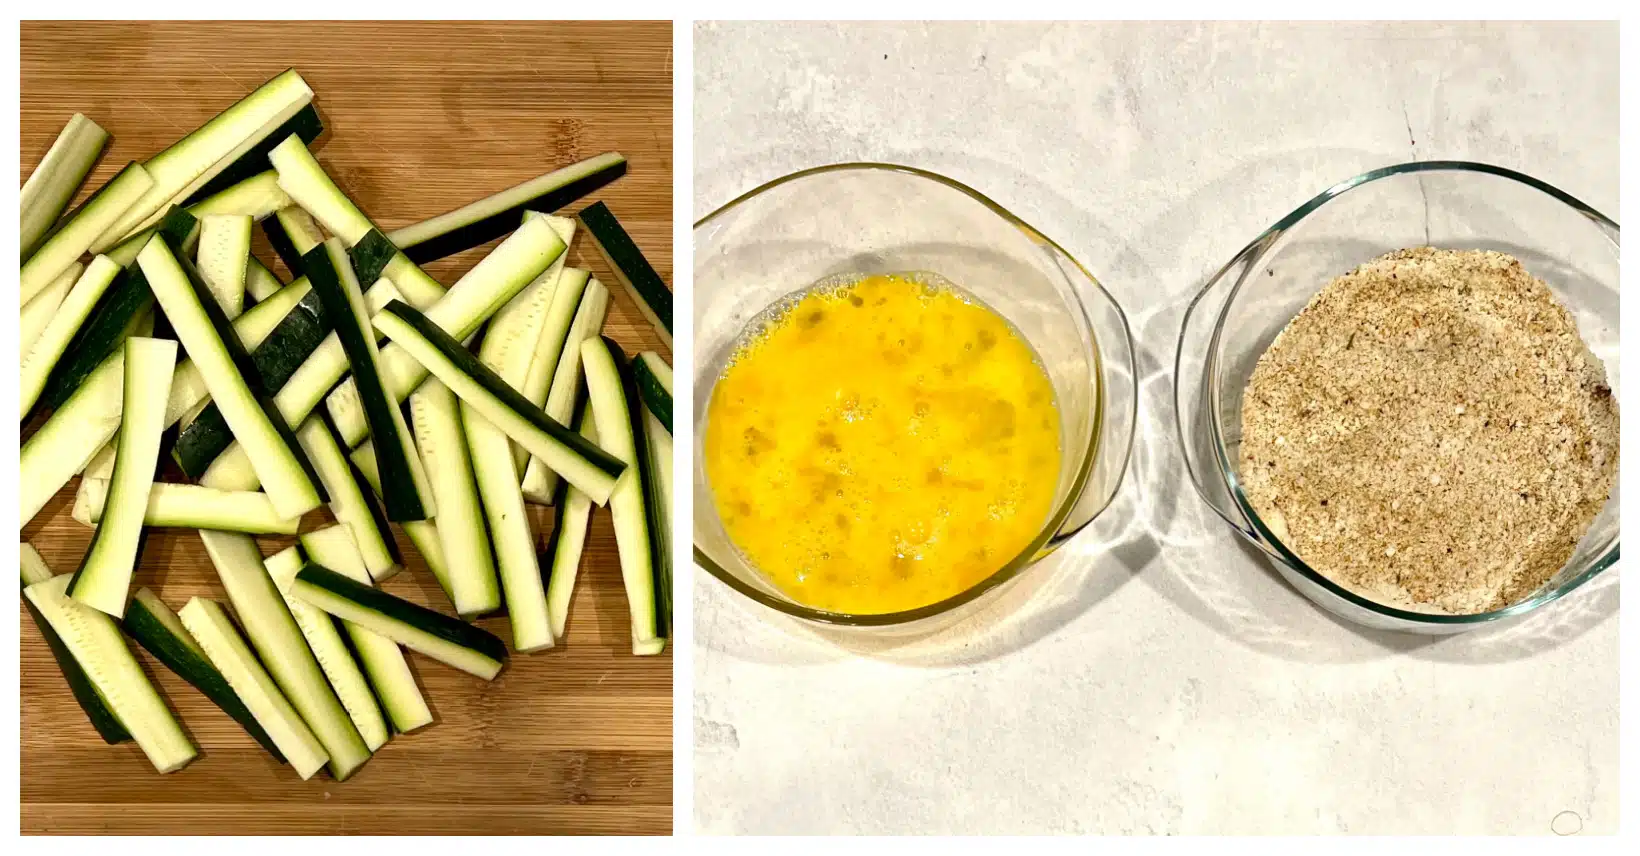 steps 1 and 2 for making zucchini french fries